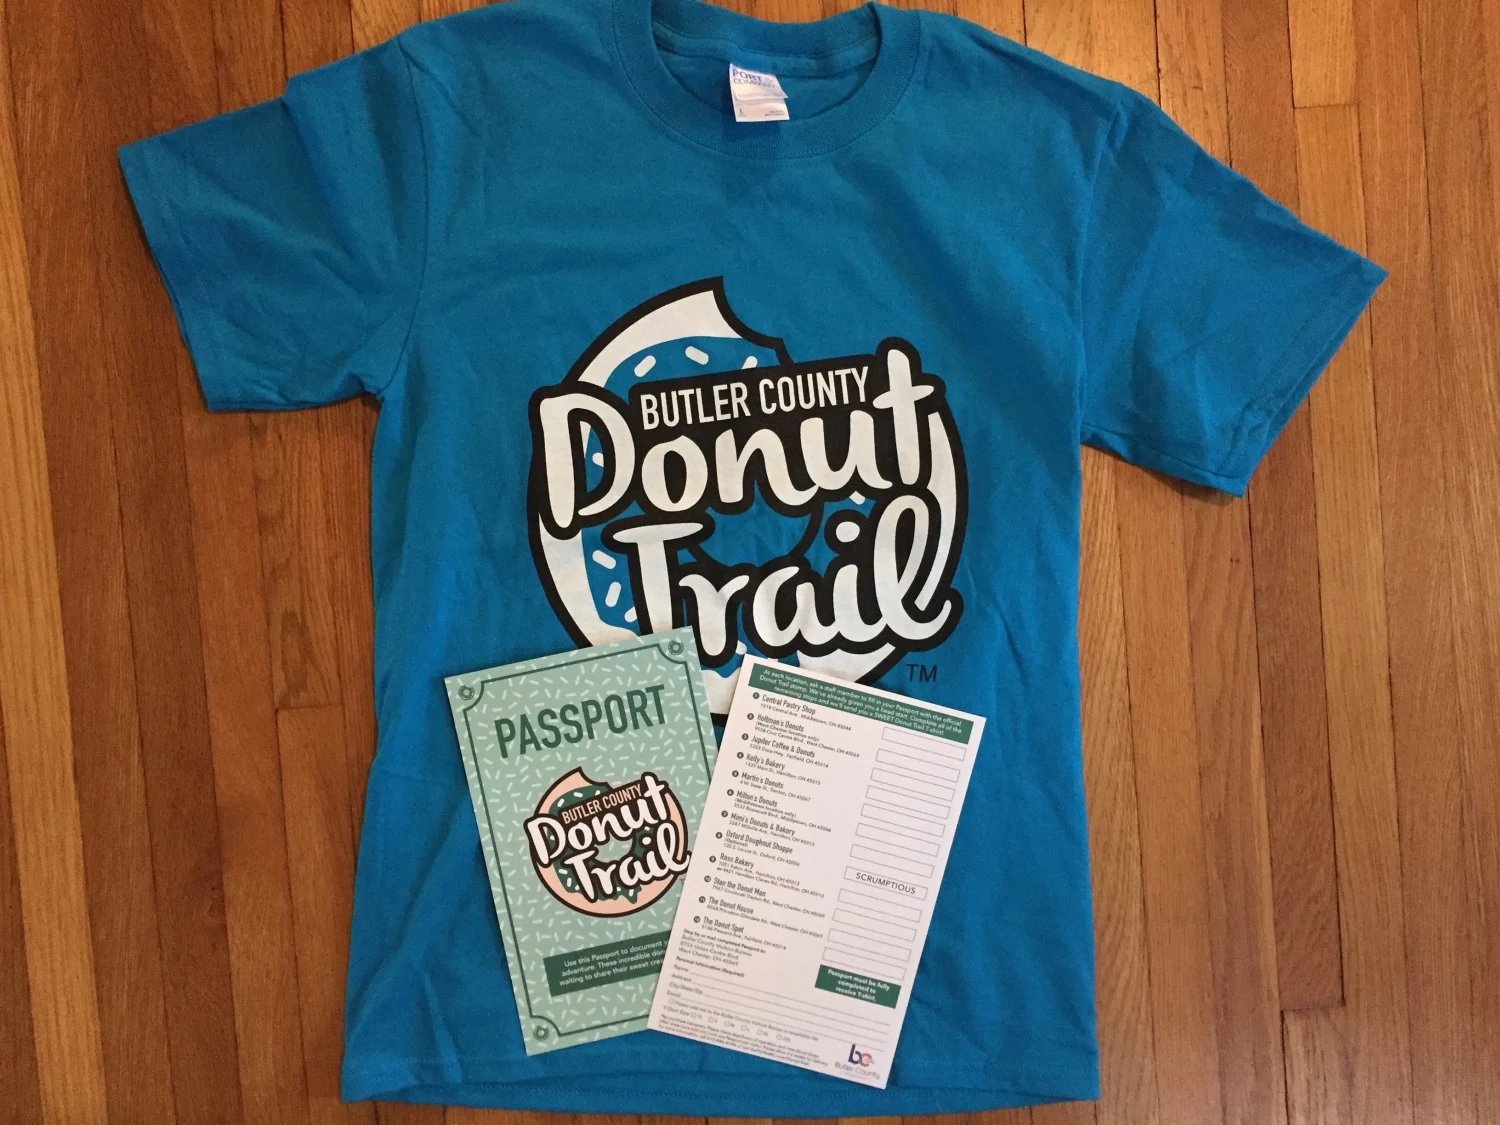 Butler County Donut Trail t-shirt and passport